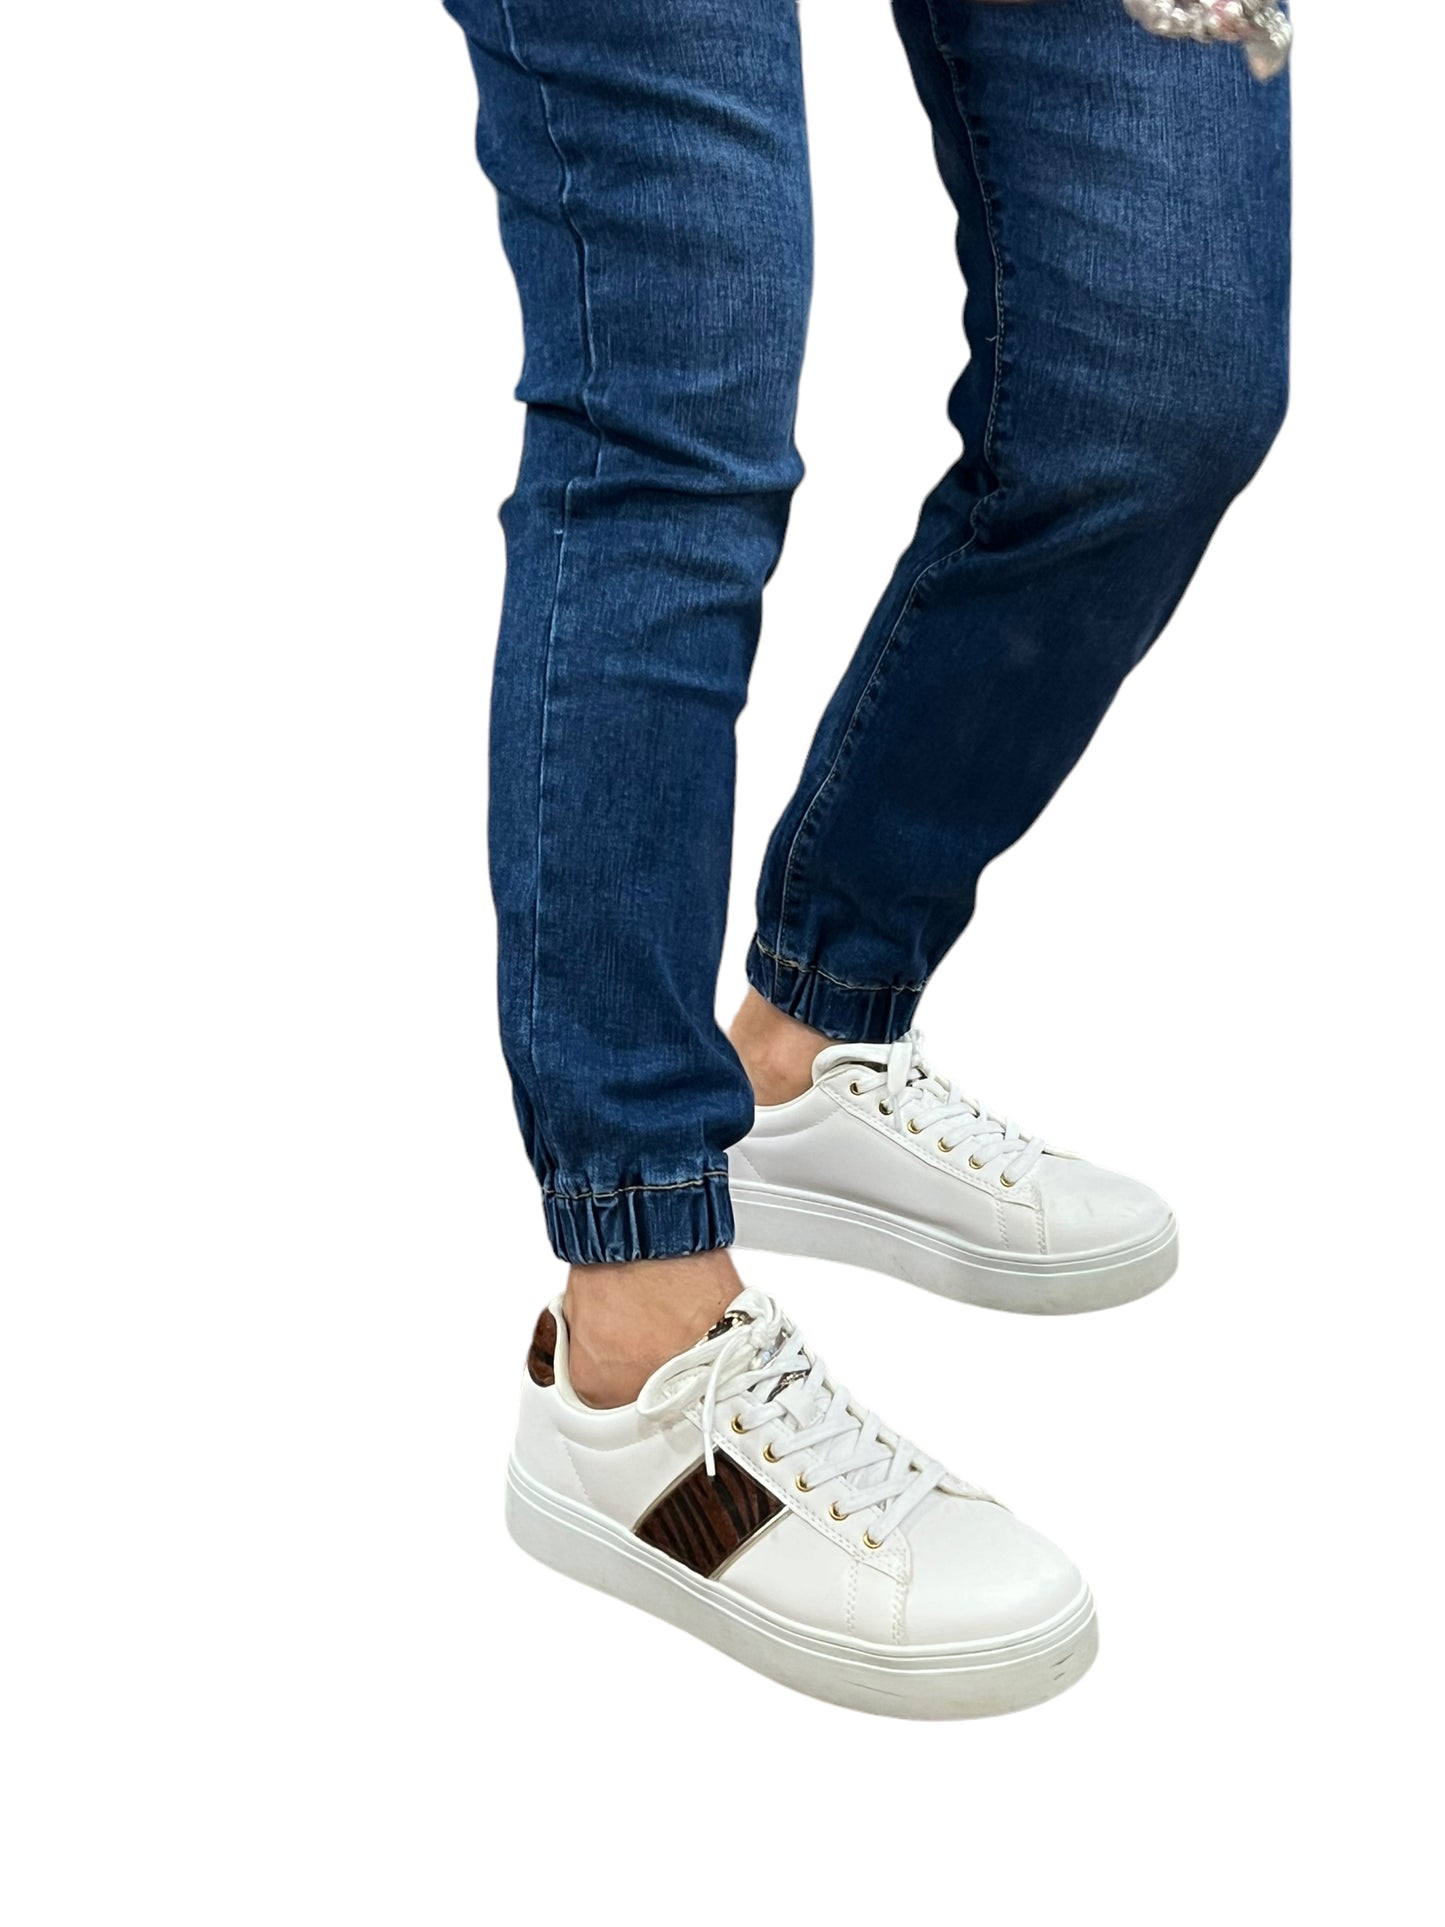 G-Smack Cuffed Ankle Jeans